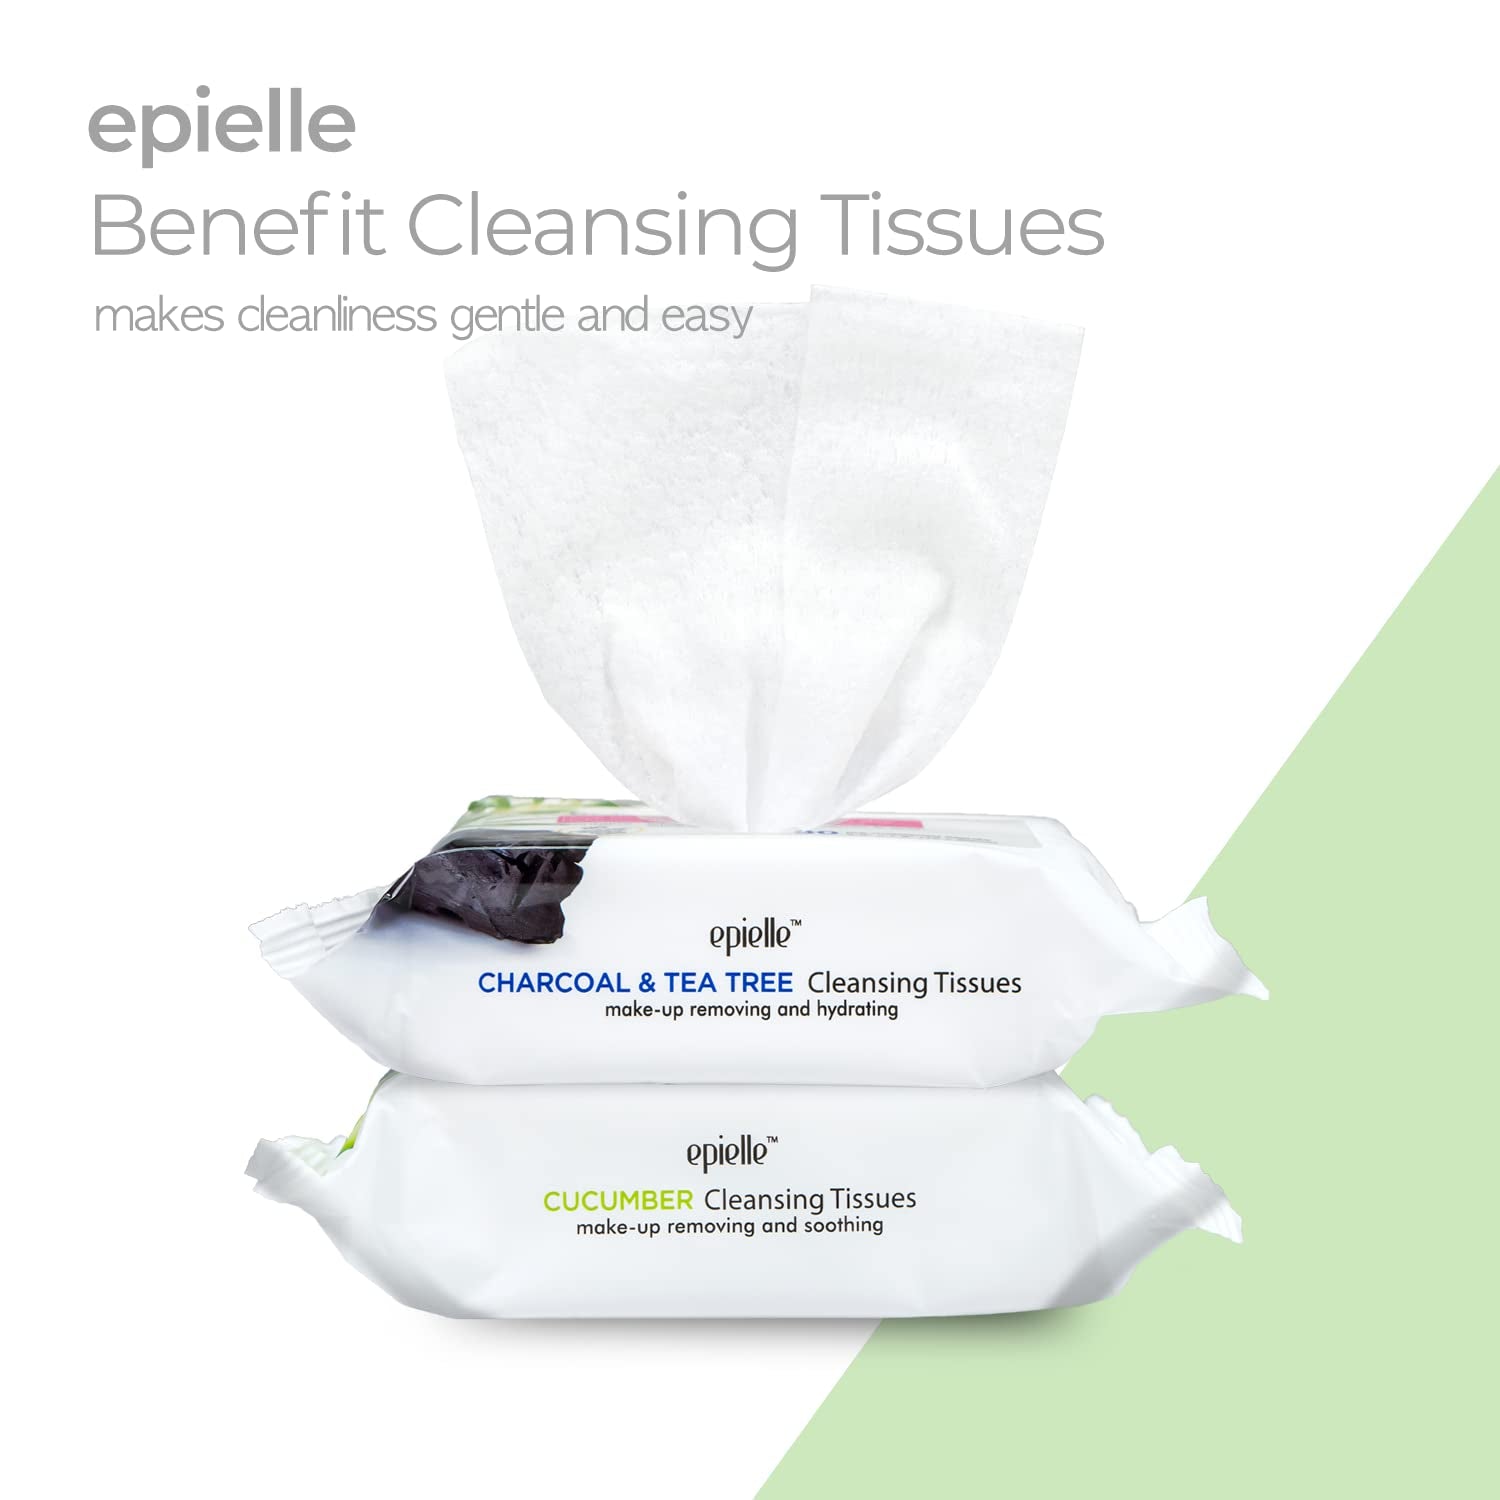 Epielle New Makeup Remover Cleansing Wipes Tissue | Gentle for All Skin Types | Daily Facial Cleansing Towelettes | Removes Dirt, Oil, Makeup | Nicely Scented - Charcoal, Collagen, Aloe, Cucumber, Green Tea, Argan Oil | 30 Count | Assorted 6 Pack